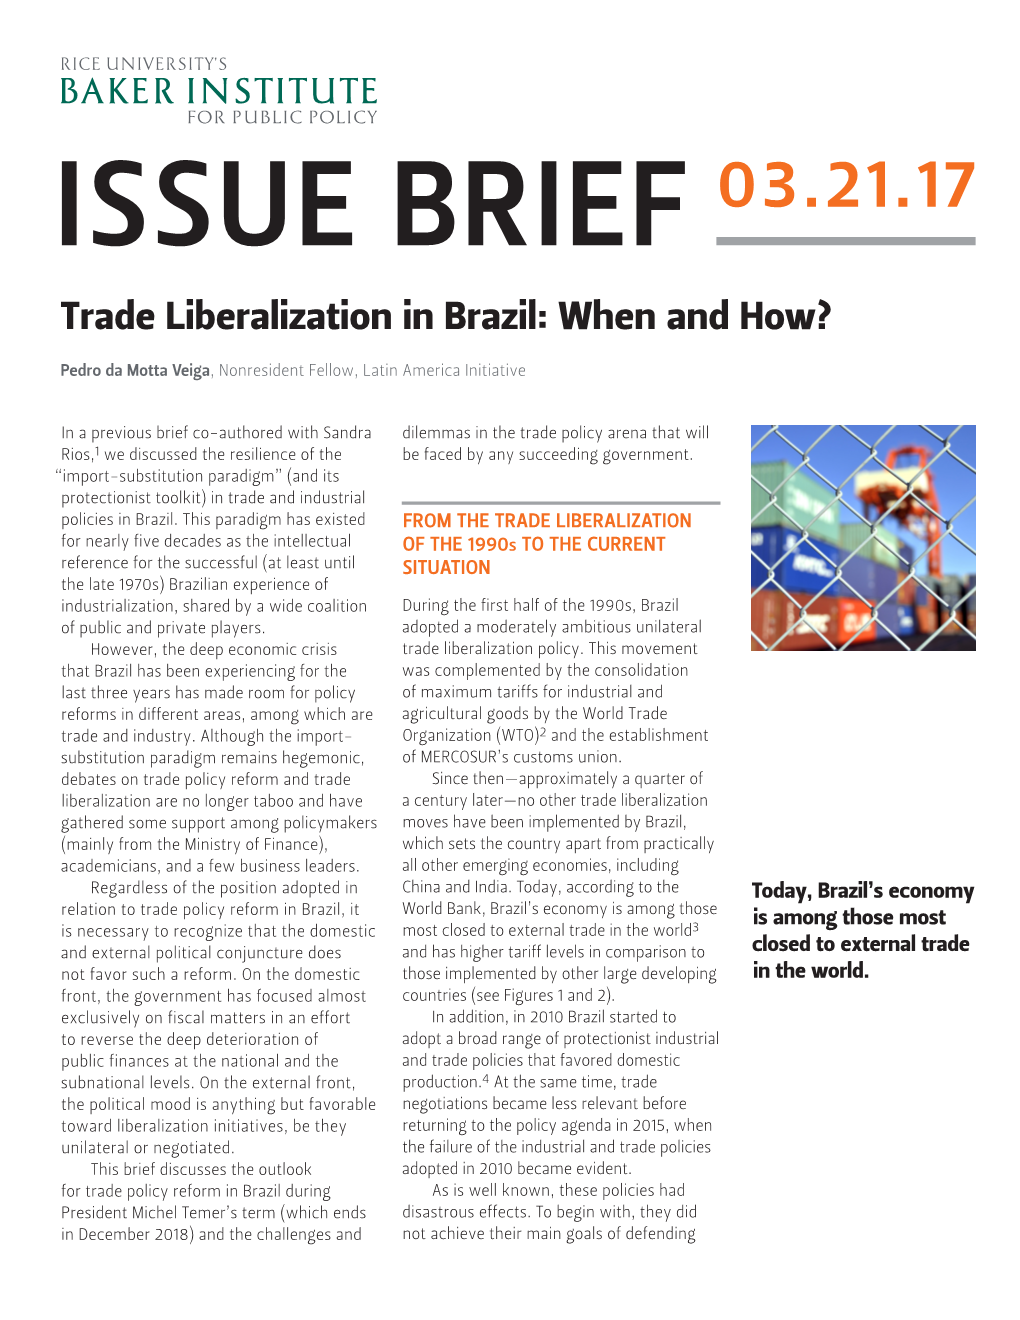 Trade Liberalization in Brazil: When and How?